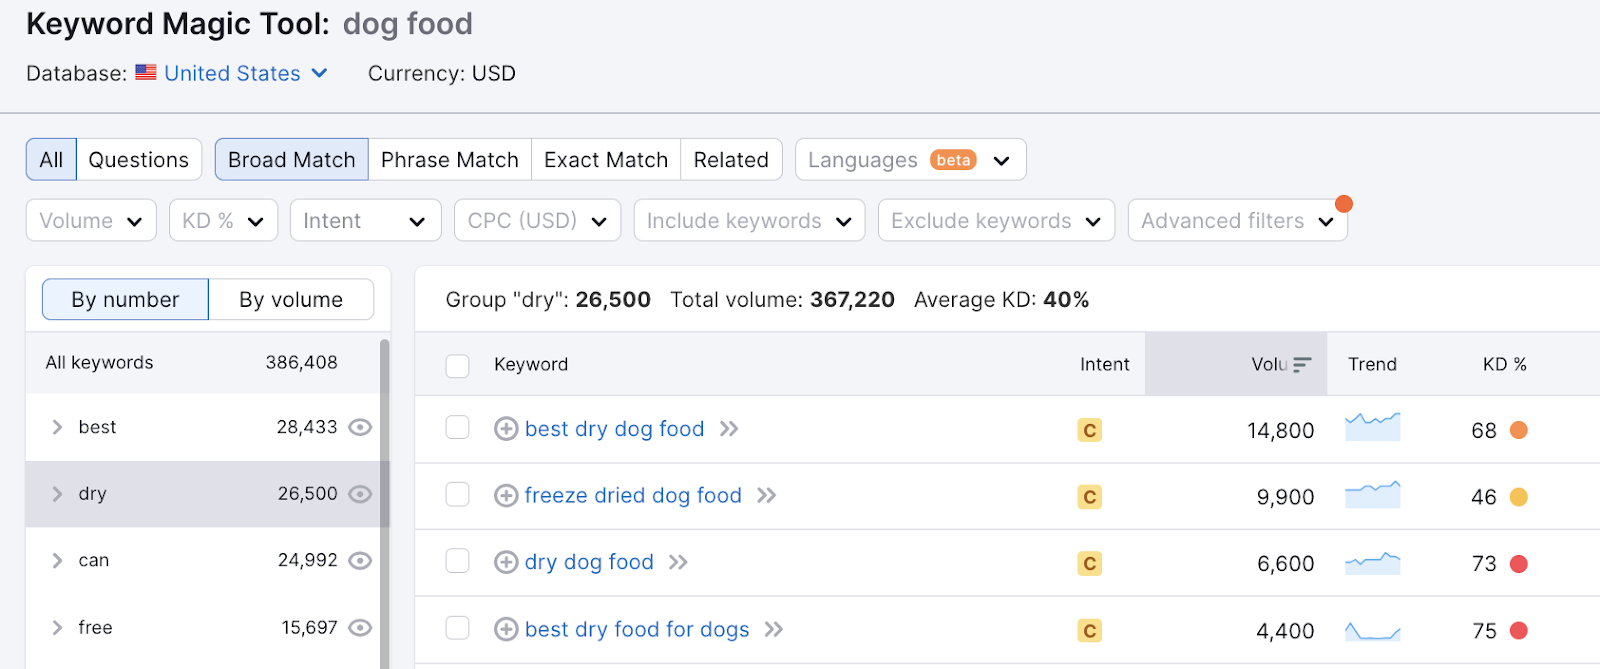 all the keywords relating to "dry" topic return results such as "best dry dog food," "dry dog food" etc.